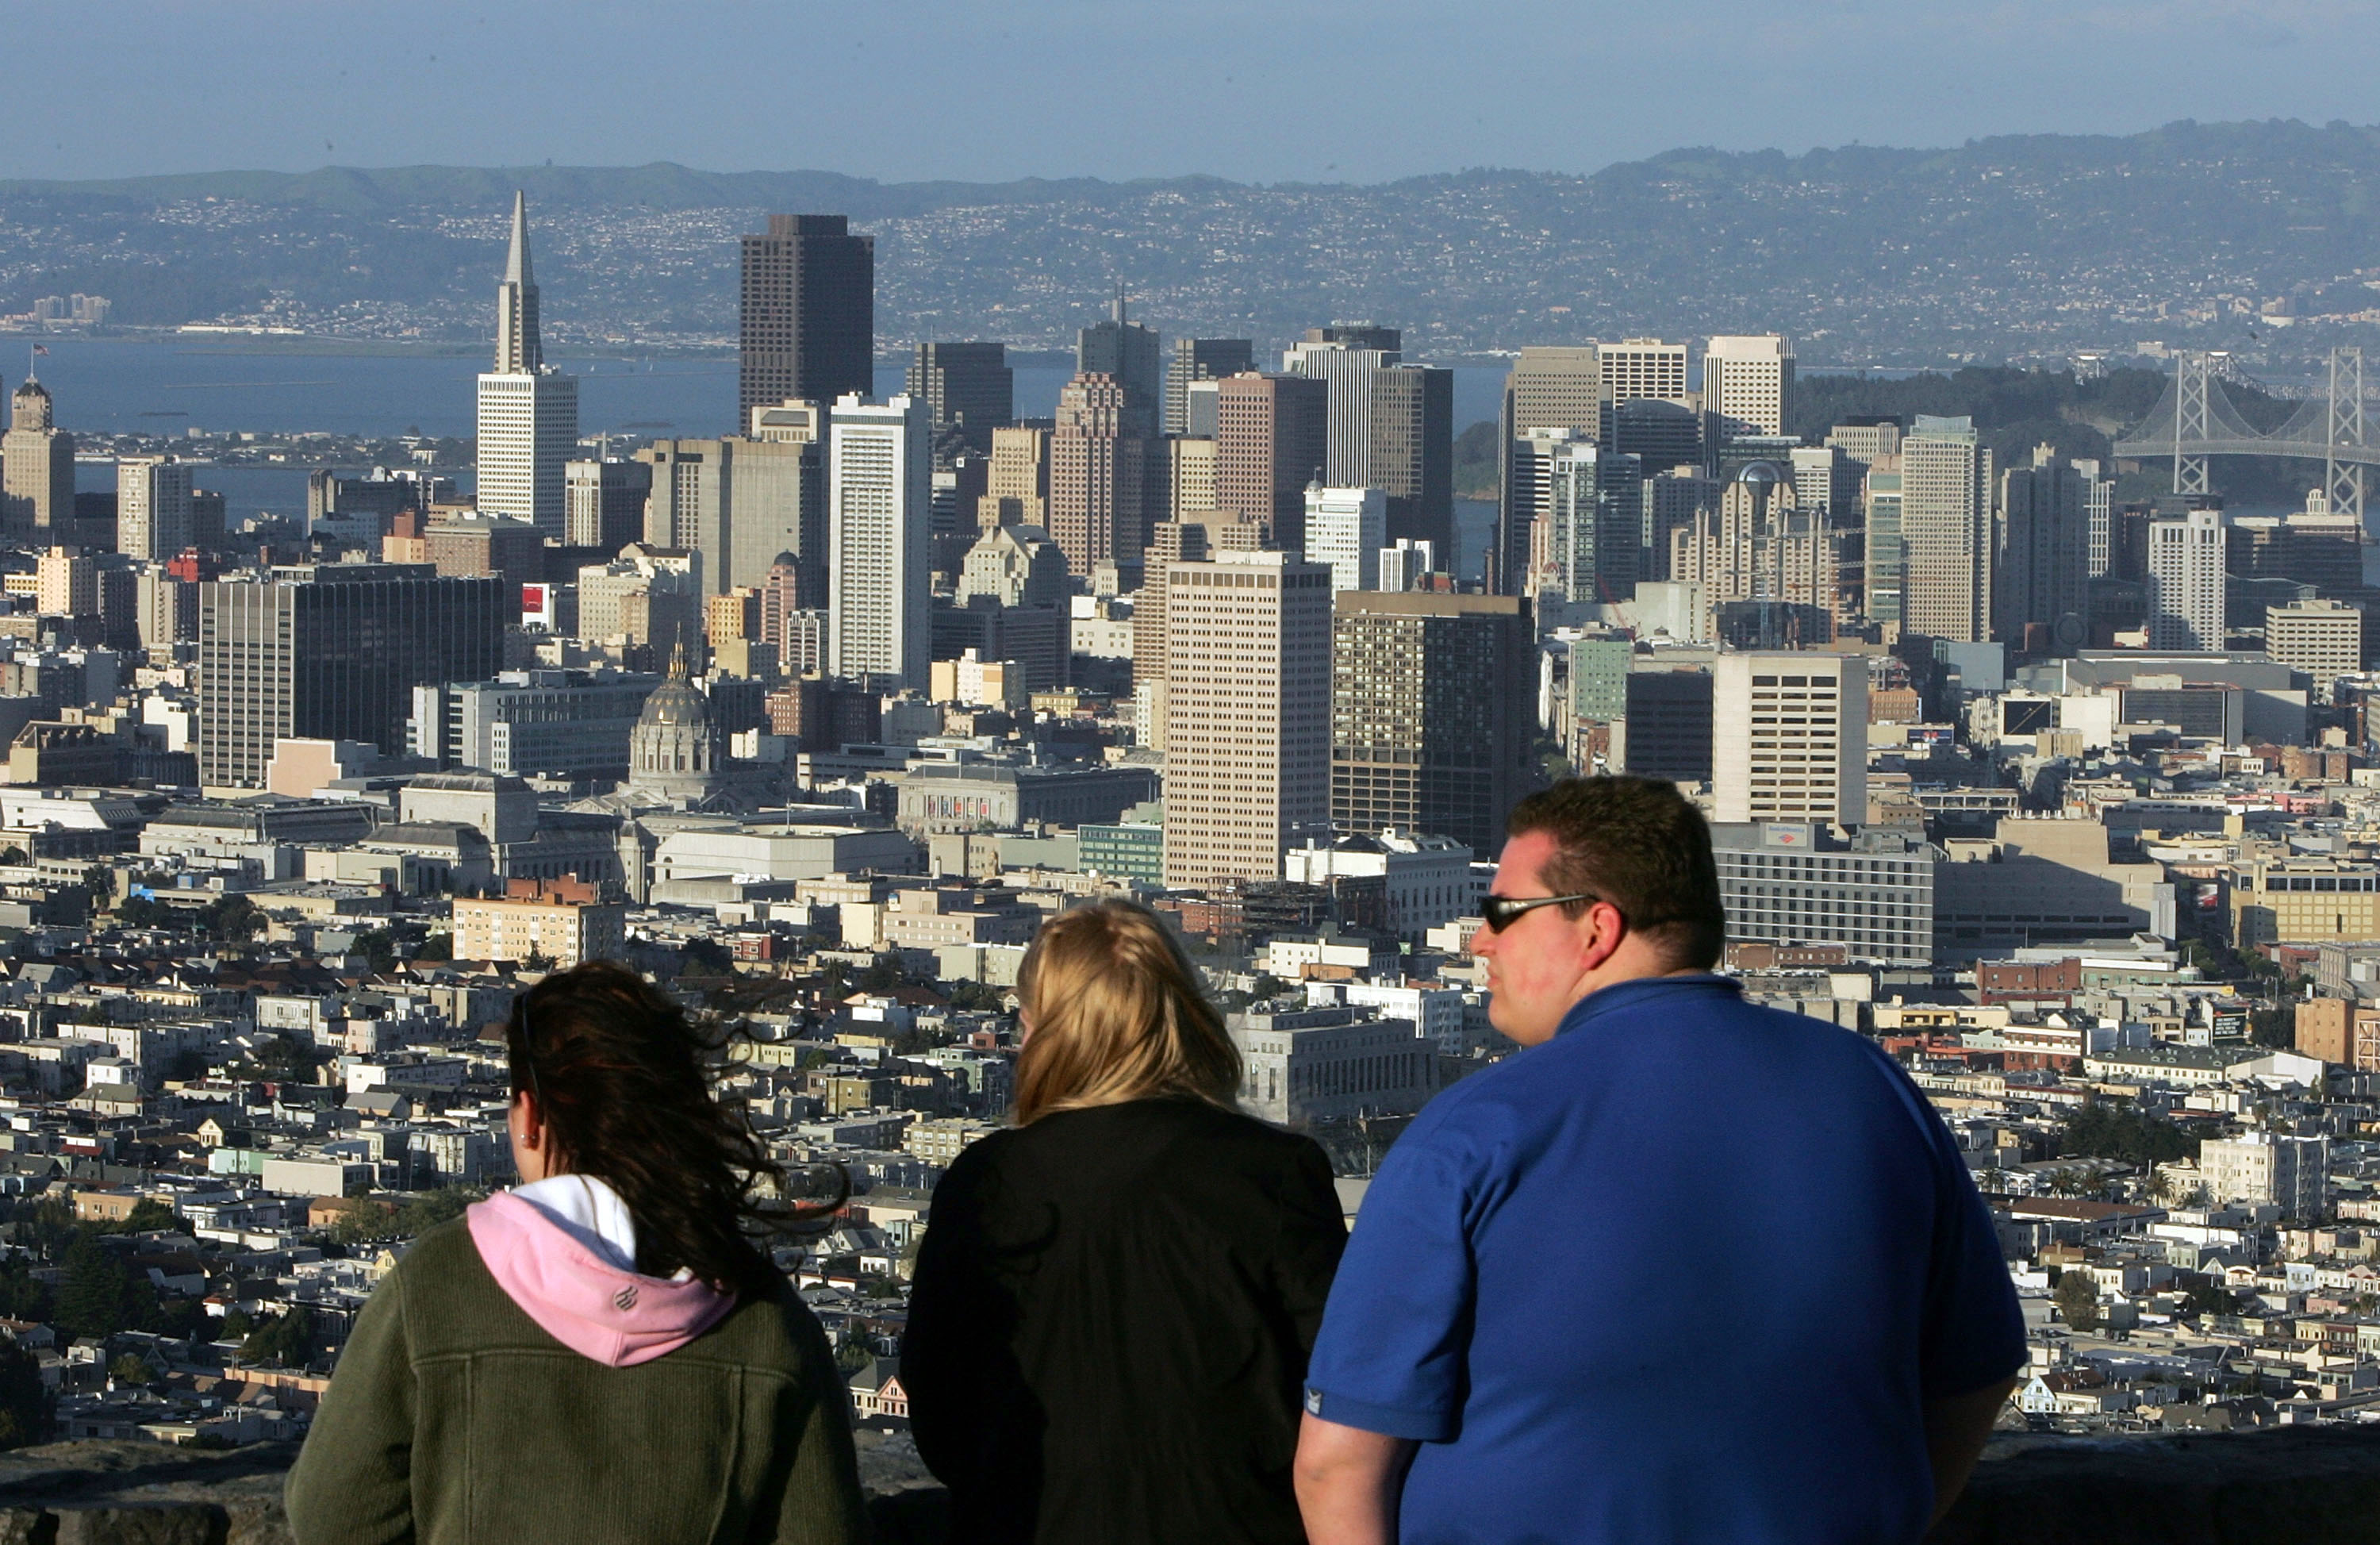 SAN FRANCISCO - MARCH 25: Tourists take in a view of downtown San Francisco from Twin Peaks March 25, 2005 in San Francisco, California. San Francisco's 49-Mile Scenic Drive was opened in 1939 as a guide for visitors to The City's 1939-1940 Golden Gate International Exposition. The route includes most of San Francisco's major sights as well as winding through many of the city's colorful neighborhoods; giving visitors a look into the diversity and beauty of the area. (Photo by Justin Sullivan/Getty Images)